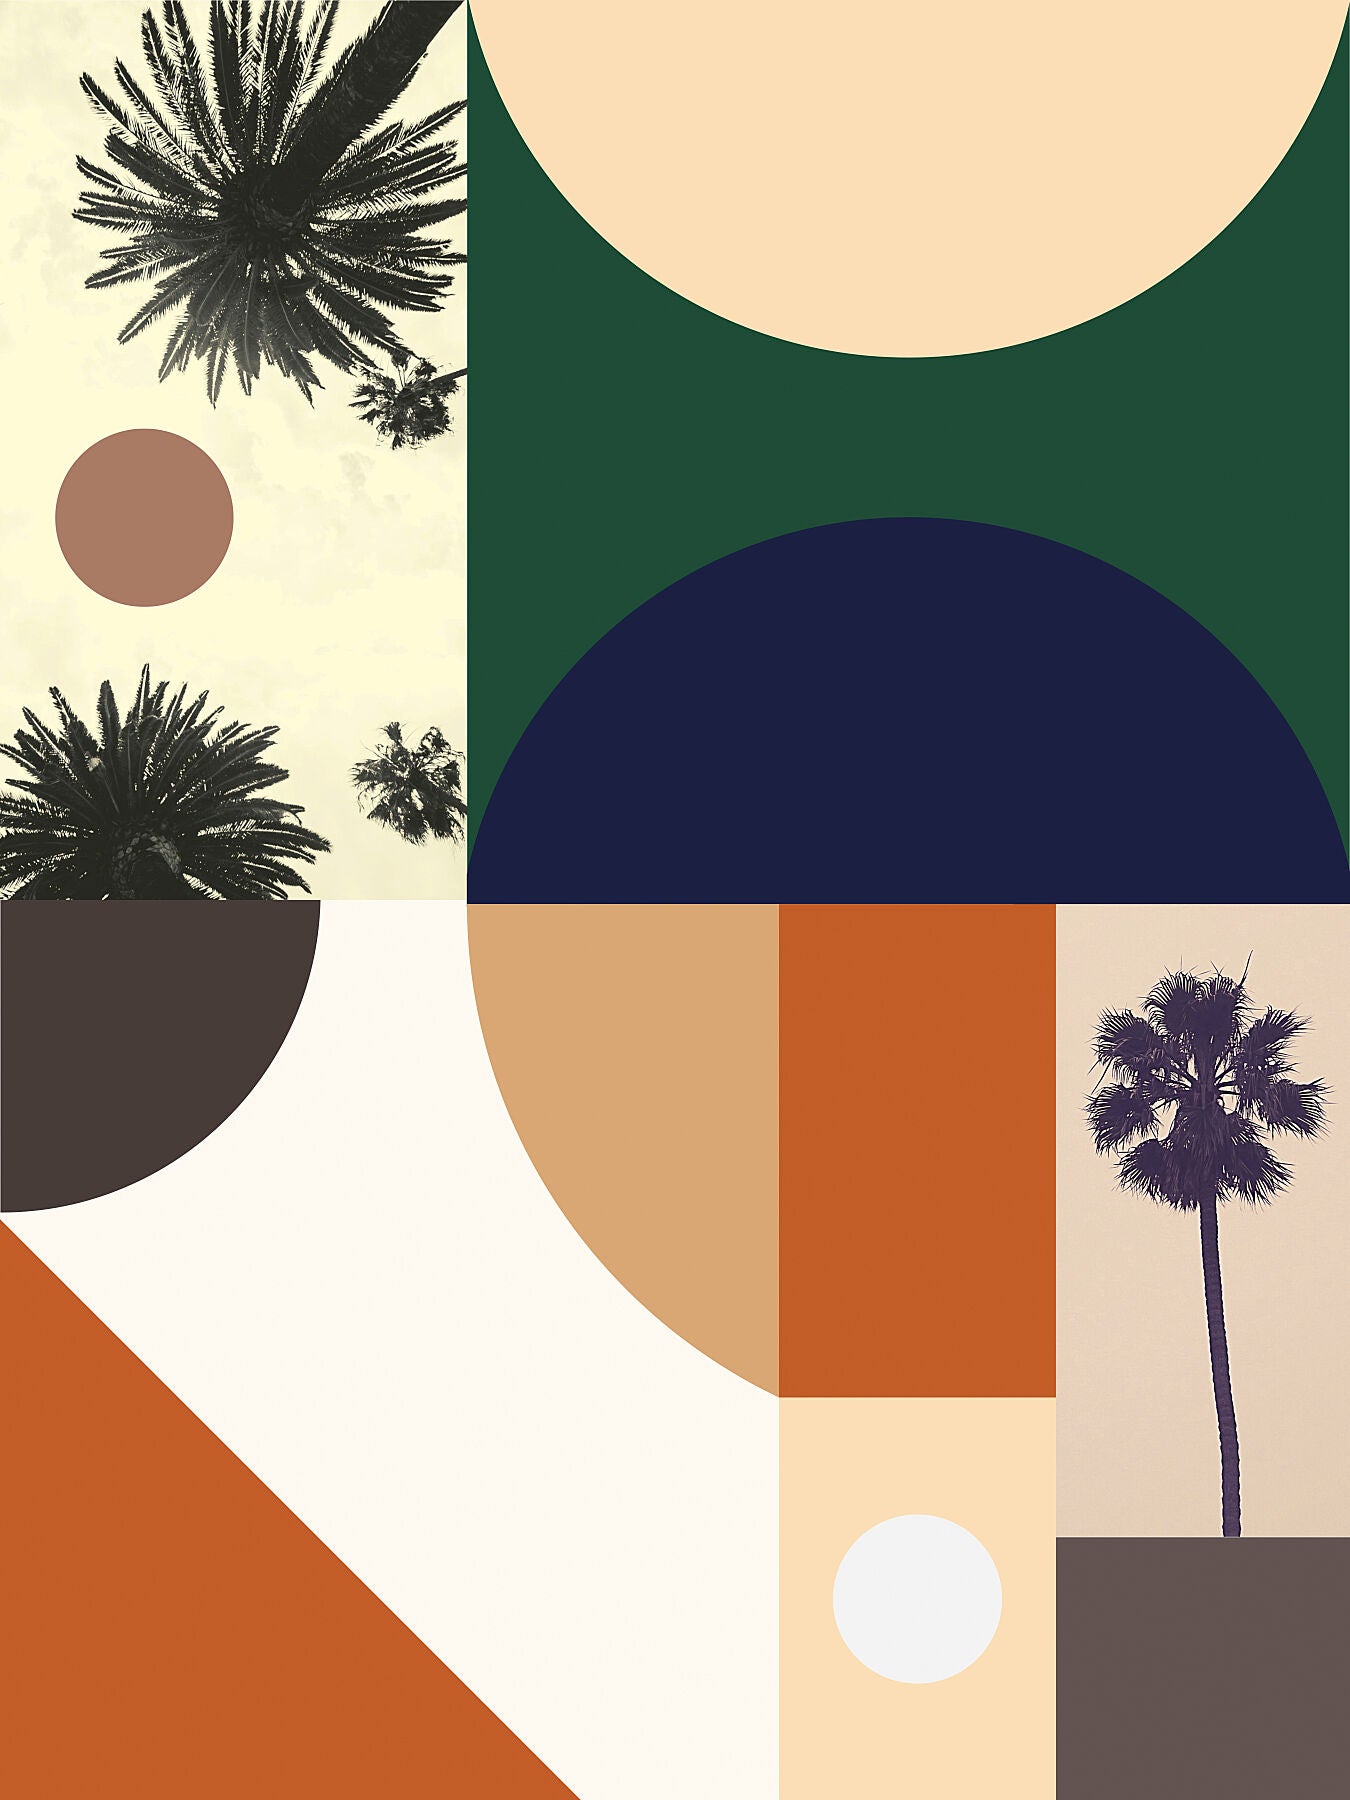 "Beverly Glen, 21st century" by George Rosaly. This unframed print, adorned with dark orange, blue, and green shapes against a neutral backdrop, encapsulates the neighbourhood's tranquillity. Palm trees seen from below add a touch of natural elegance.